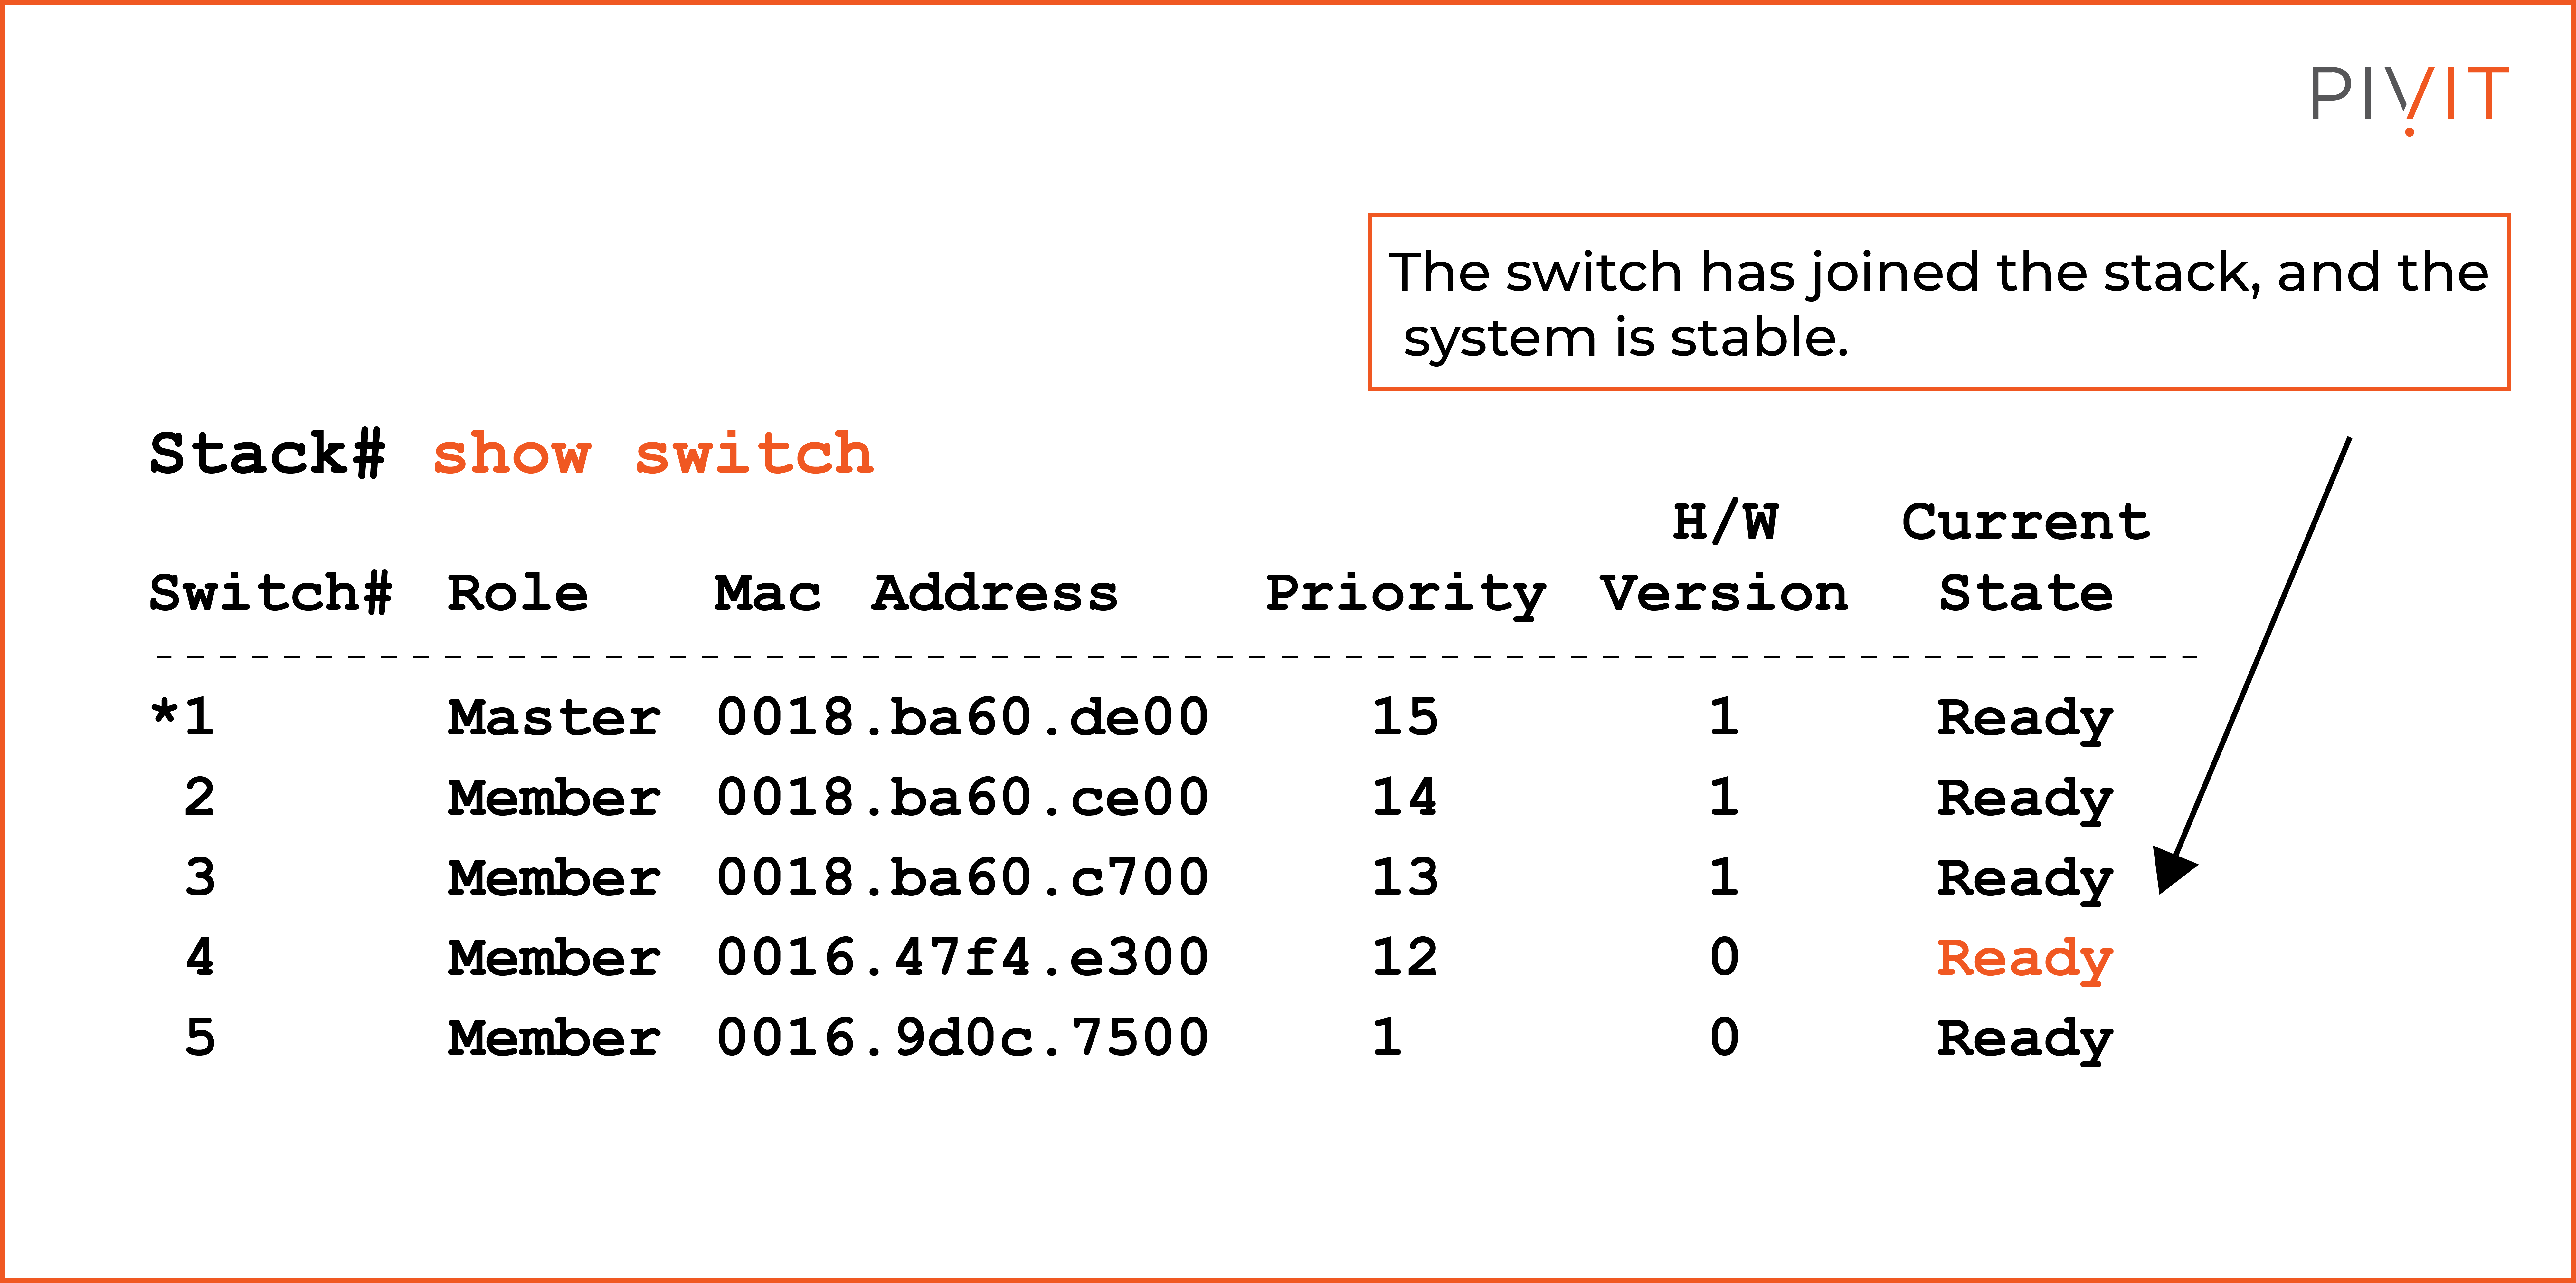 Viewing the Switch Stack Configuration Settings